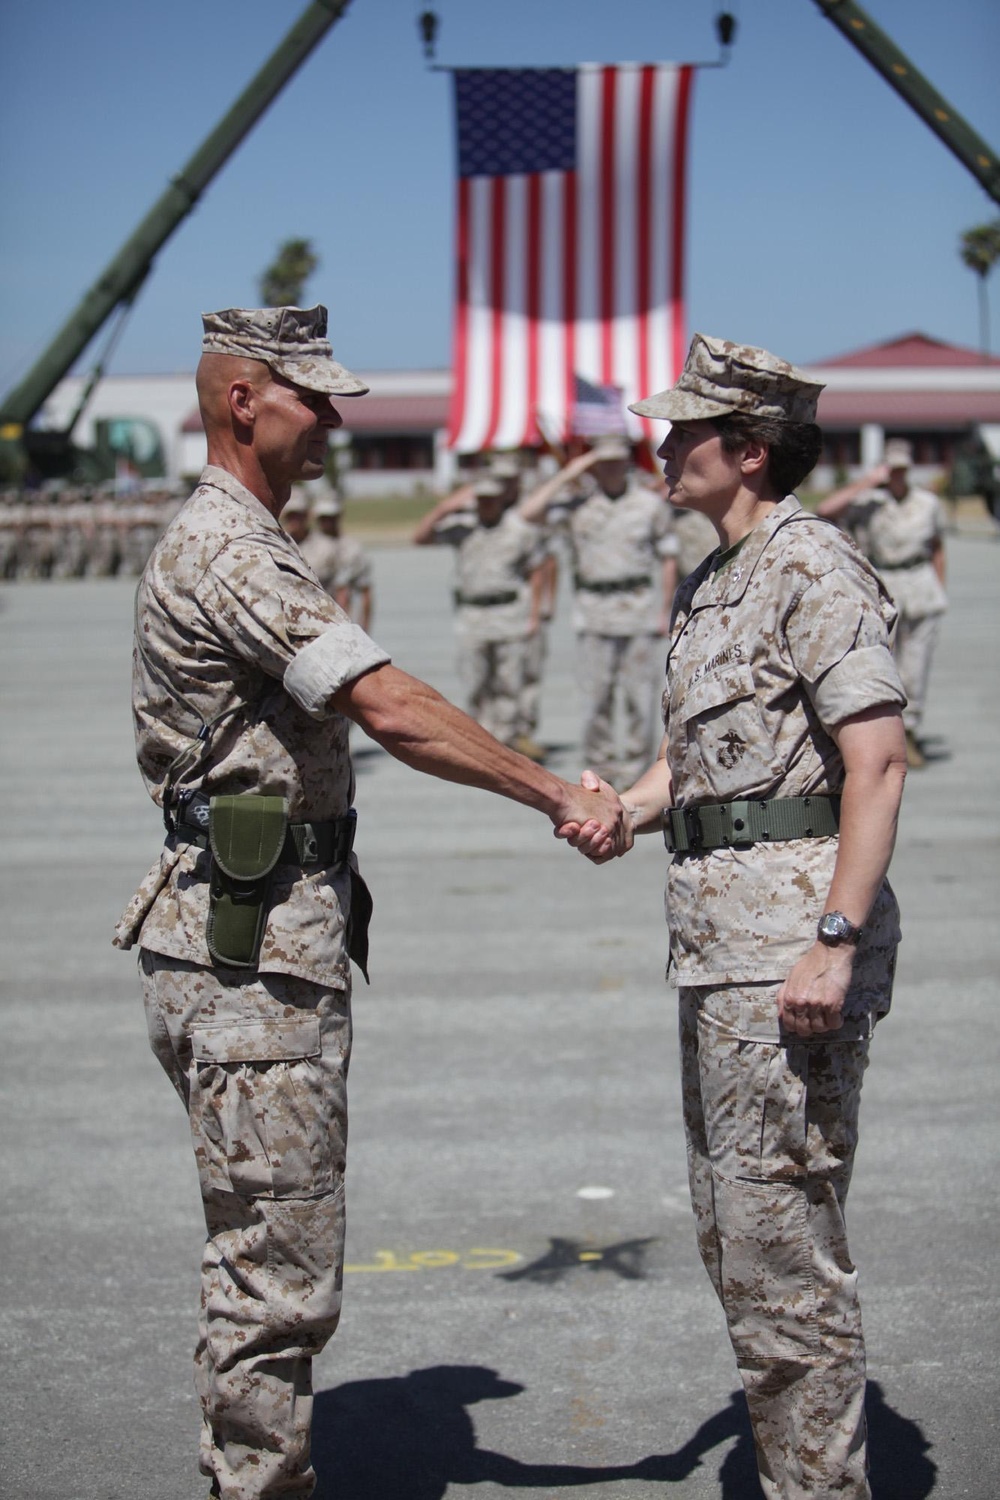 I MEF Headquarters Group welcomes new commander